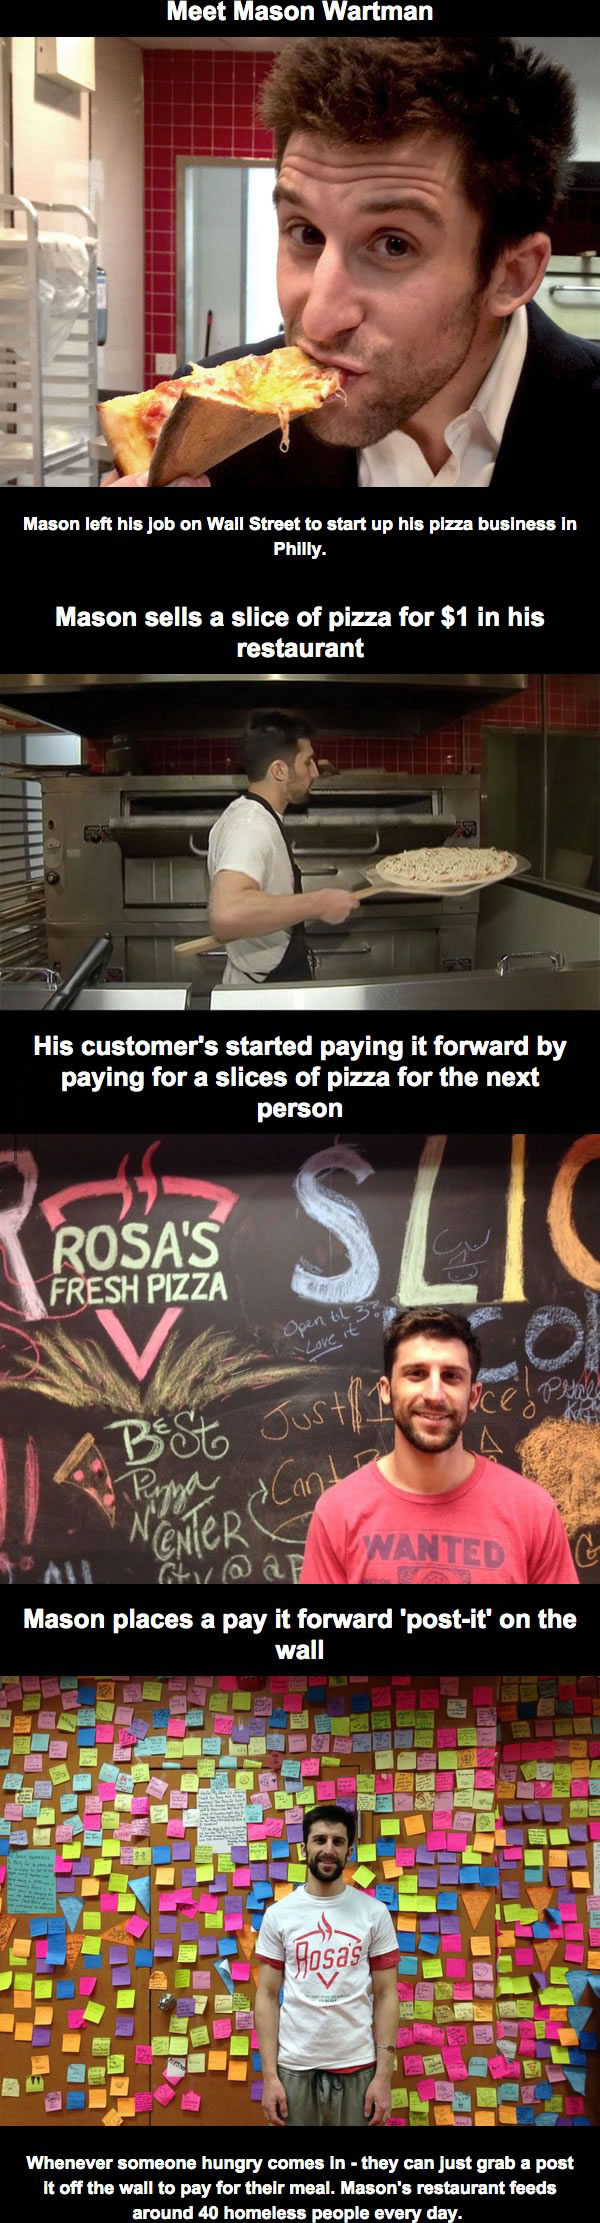 meet mason wartman, he left his job on wall street to start up his own pay it forward pizza business in philly